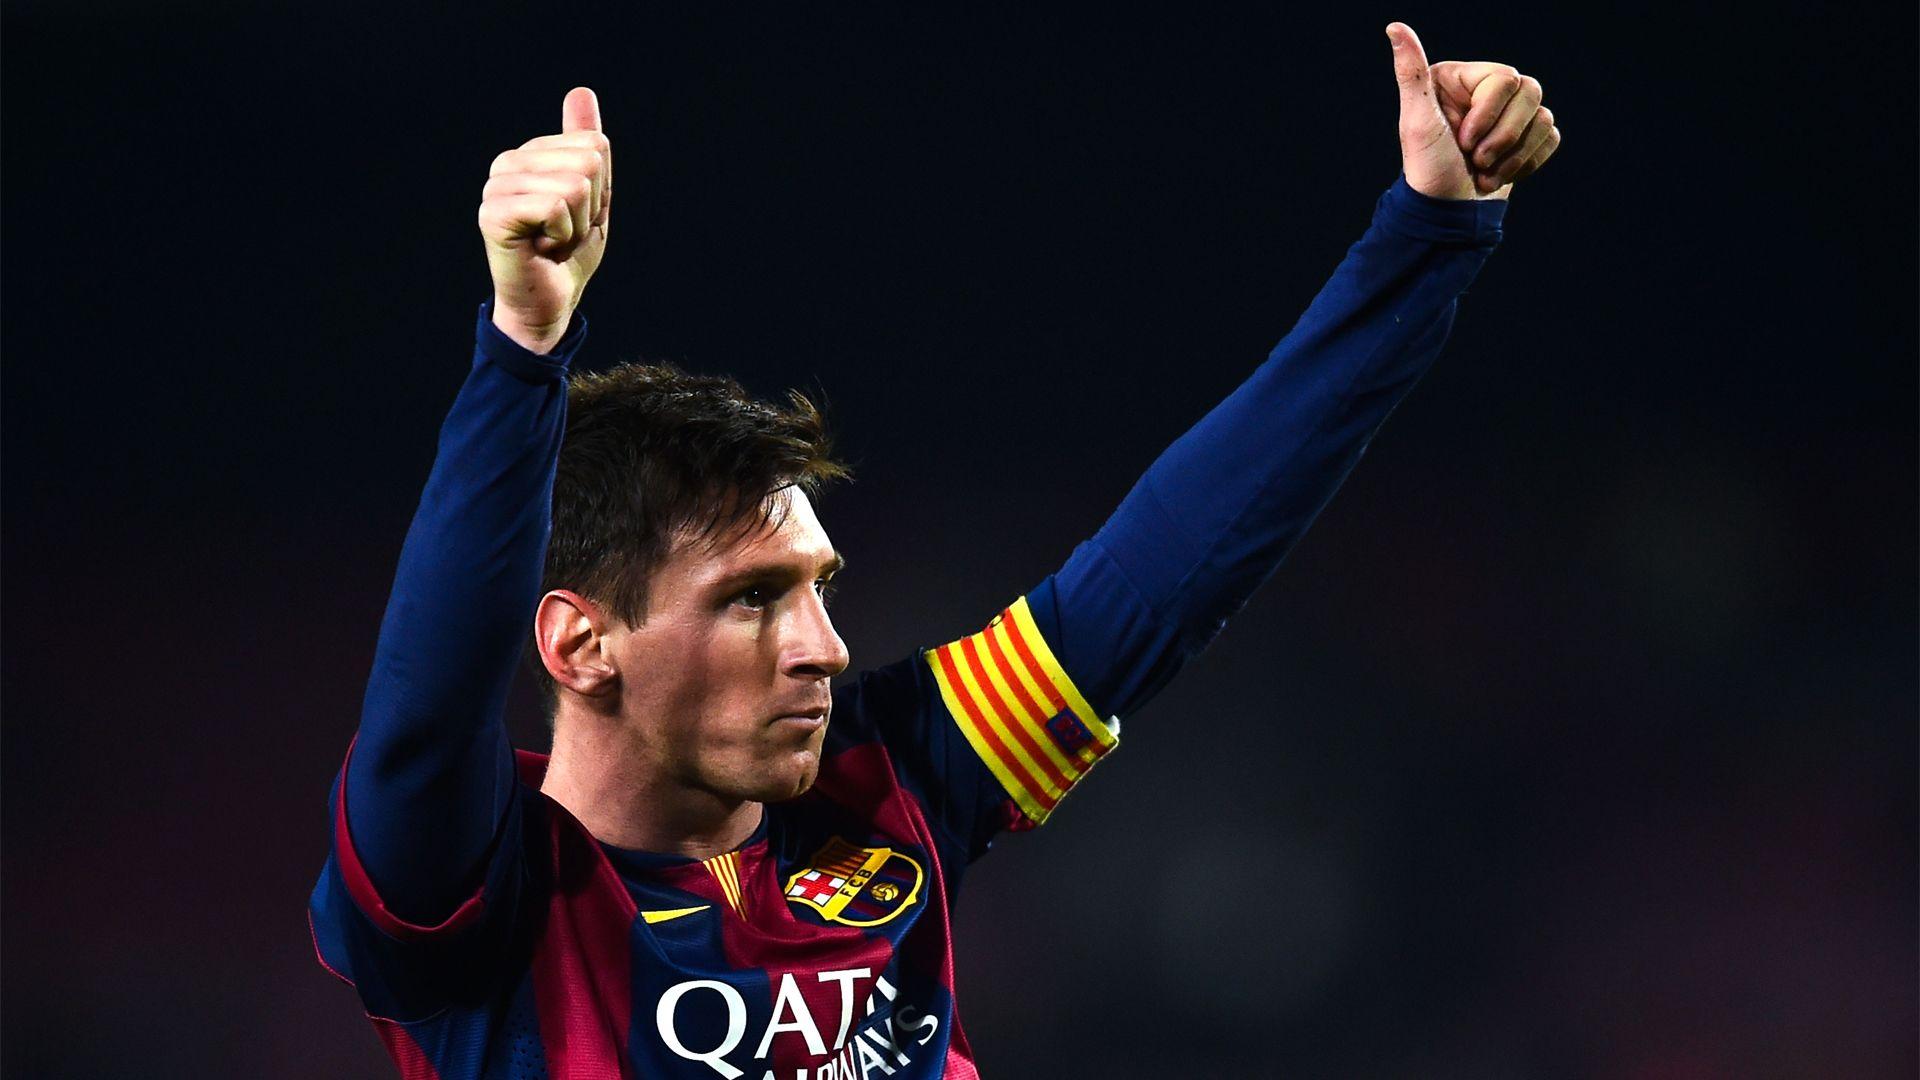 Messi Thumbs Up Wallpaper: Players, Teams, Leagues Wallpaper